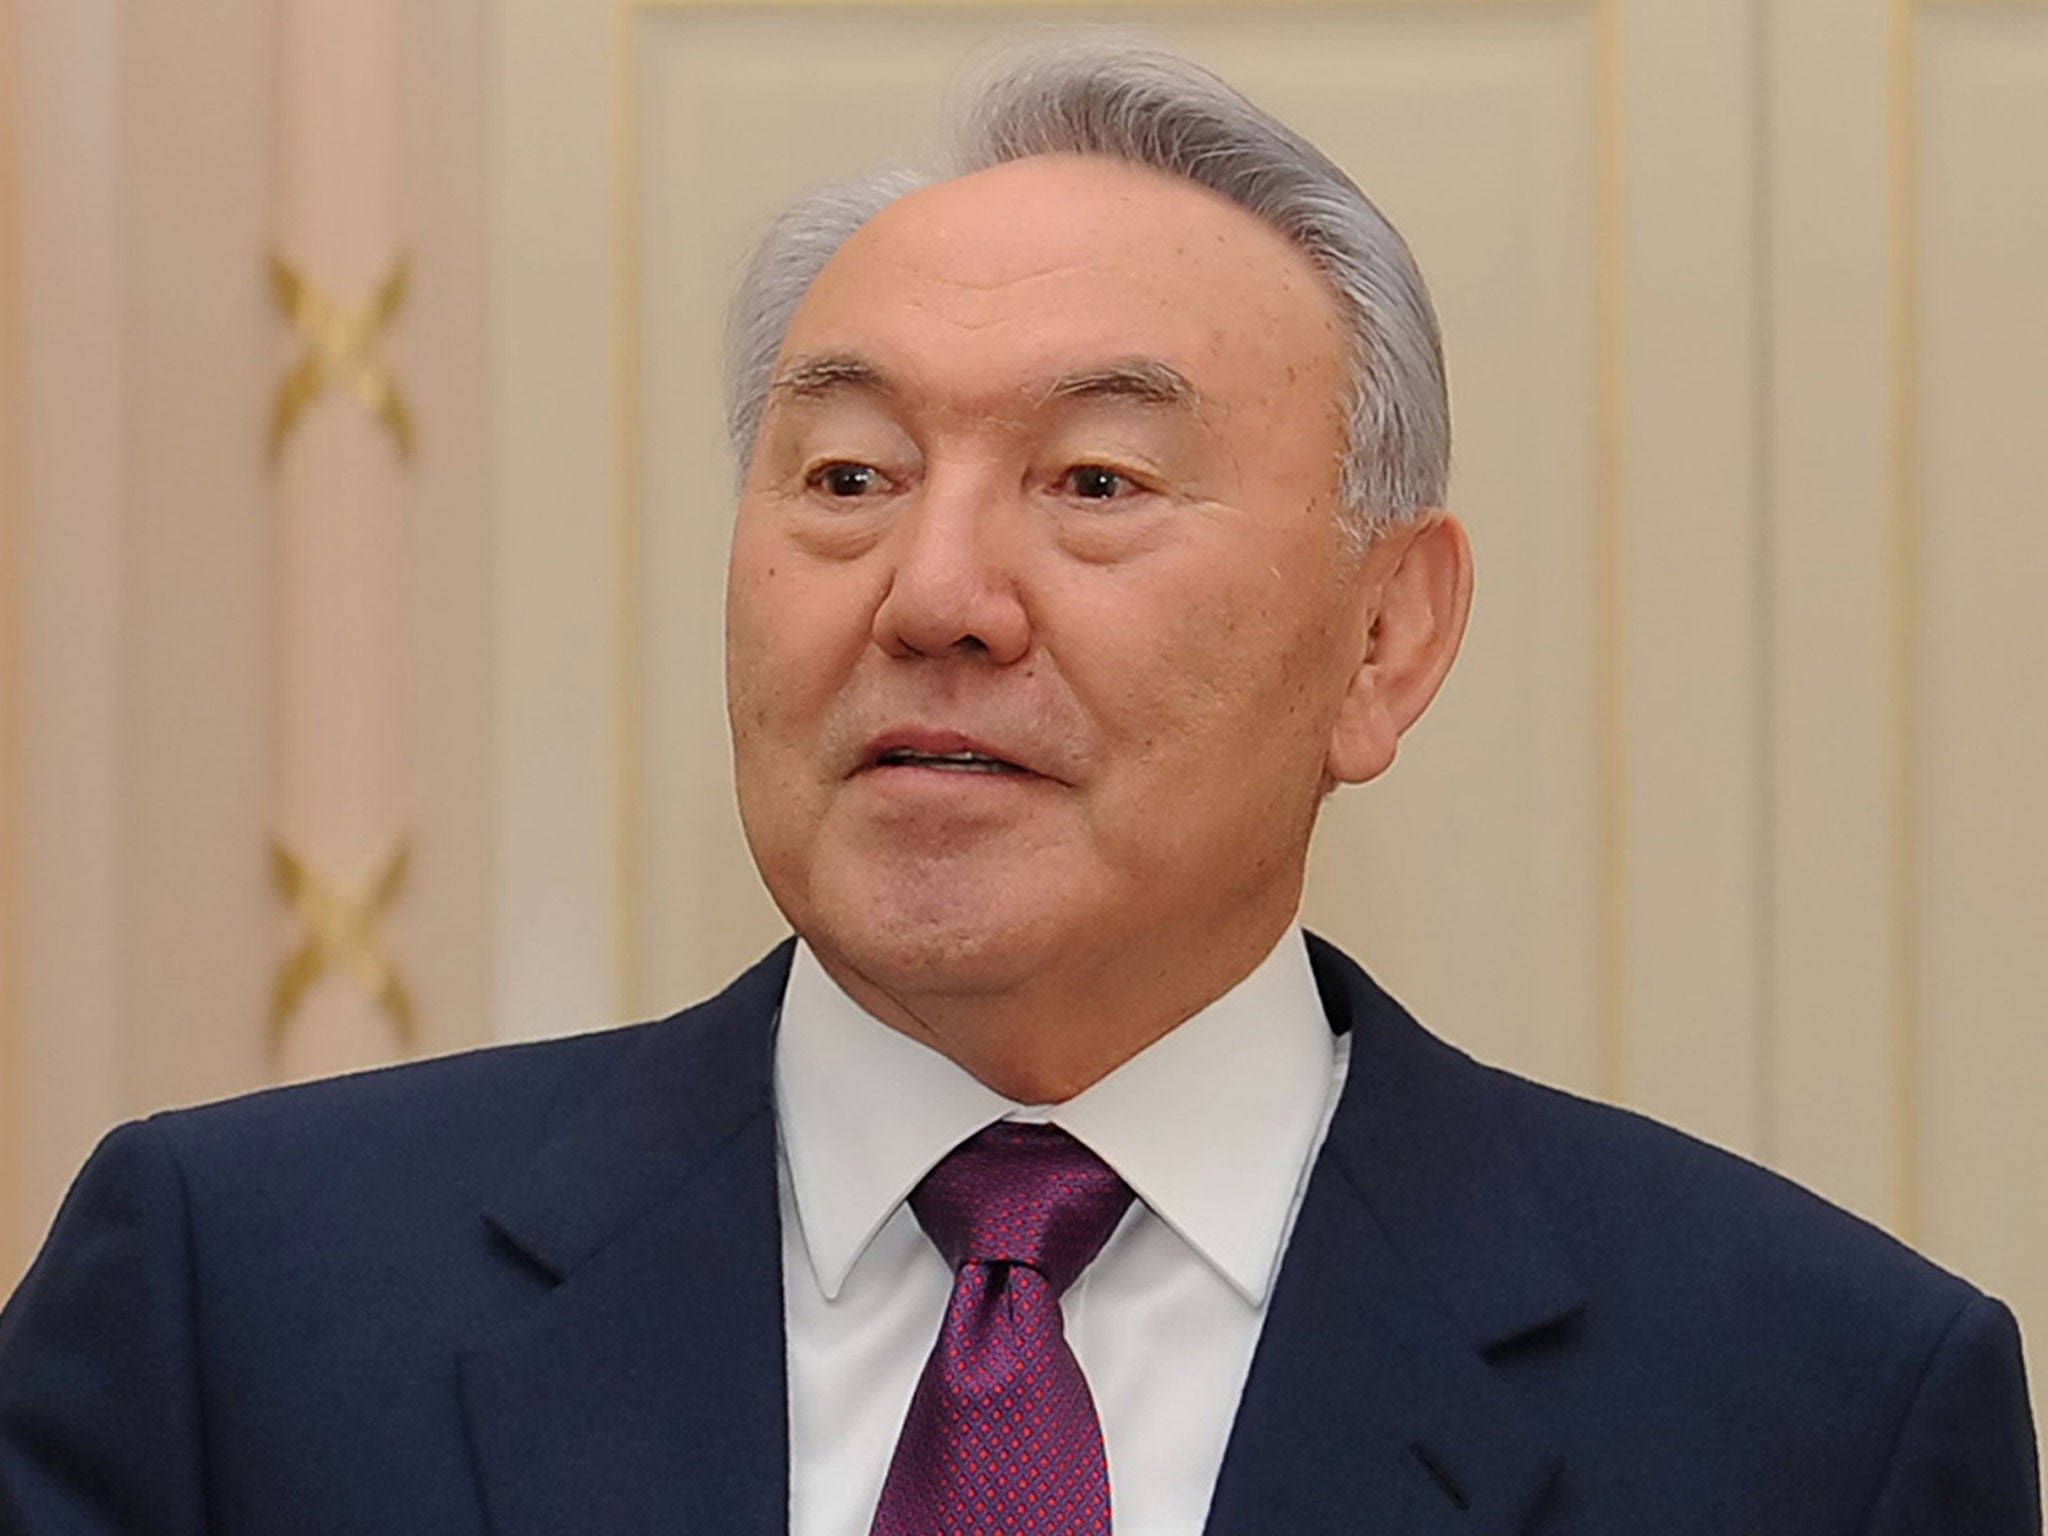 Nursultan Nazarbayev, aged 72, has been President of Kazakhstan since the break-up of the USSR in 1991